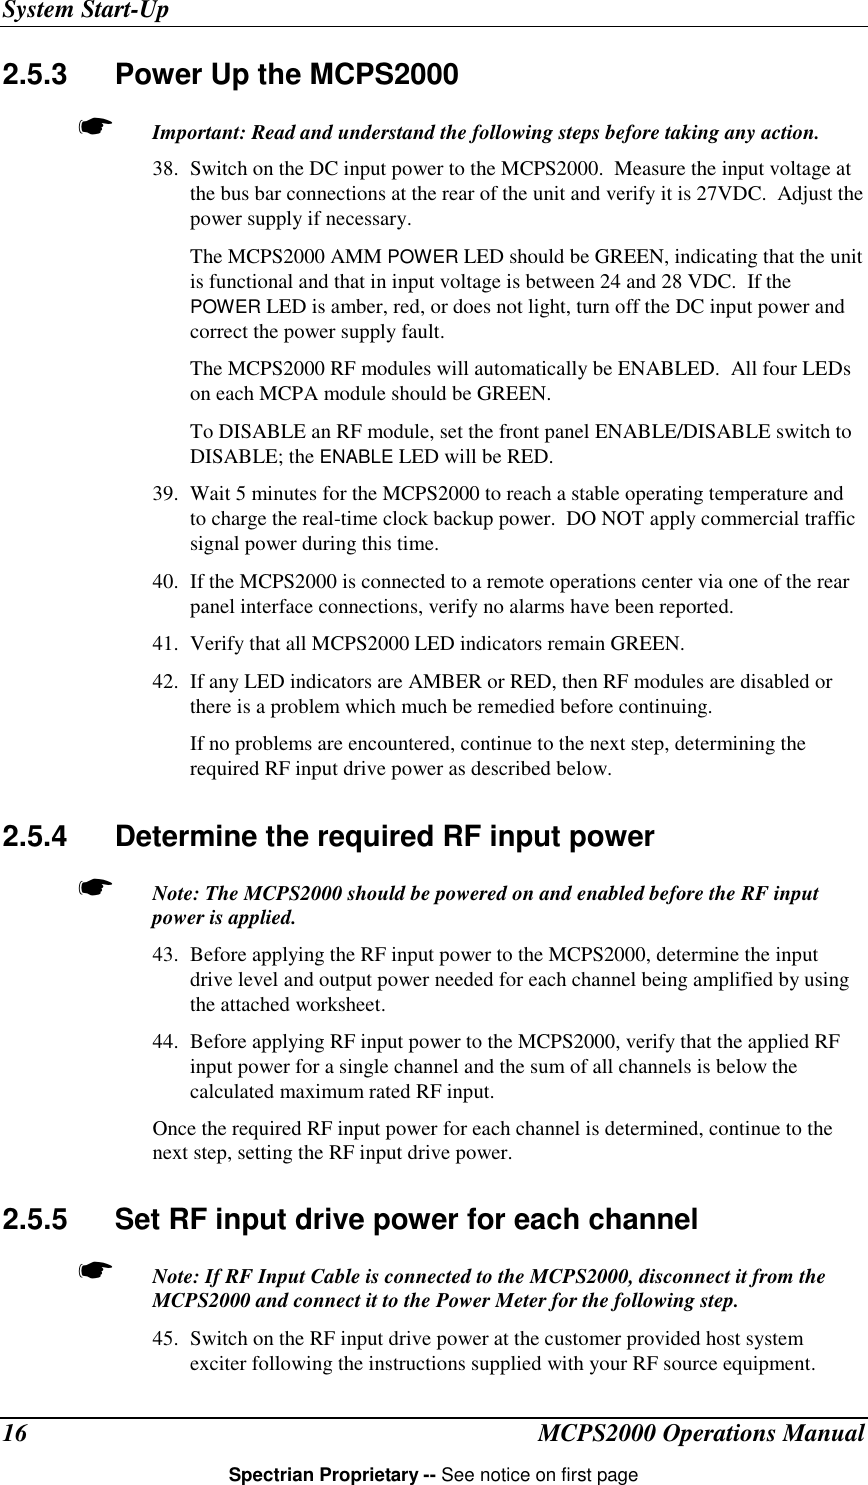 System Start-UpMCPS2000 Operations ManualSpectrian Proprietary -- See notice on first page162.5.3  Power Up the MCPS2000☛ Important: Read and understand the following steps before taking any action.38. Switch on the DC input power to the MCPS2000.  Measure the input voltage atthe bus bar connections at the rear of the unit and verify it is 27VDC.  Adjust thepower supply if necessary.The MCPS2000 AMM POWER LED should be GREEN, indicating that the unitis functional and that in input voltage is between 24 and 28 VDC.  If thePOWER LED is amber, red, or does not light, turn off the DC input power andcorrect the power supply fault.The MCPS2000 RF modules will automatically be ENABLED.  All four LEDson each MCPA module should be GREEN.To DISABLE an RF module, set the front panel ENABLE/DISABLE switch toDISABLE; the ENABLE LED will be RED.39. Wait 5 minutes for the MCPS2000 to reach a stable operating temperature andto charge the real-time clock backup power.  DO NOT apply commercial trafficsignal power during this time.40. If the MCPS2000 is connected to a remote operations center via one of the rearpanel interface connections, verify no alarms have been reported.41. Verify that all MCPS2000 LED indicators remain GREEN.42. If any LED indicators are AMBER or RED, then RF modules are disabled orthere is a problem which much be remedied before continuing.If no problems are encountered, continue to the next step, determining therequired RF input drive power as described below.2.5.4  Determine the required RF input power☛ Note: The MCPS2000 should be powered on and enabled before the RF inputpower is applied.43. Before applying the RF input power to the MCPS2000, determine the inputdrive level and output power needed for each channel being amplified by usingthe attached worksheet.44. Before applying RF input power to the MCPS2000, verify that the applied RFinput power for a single channel and the sum of all channels is below thecalculated maximum rated RF input.Once the required RF input power for each channel is determined, continue to thenext step, setting the RF input drive power.2.5.5  Set RF input drive power for each channel☛ Note: If RF Input Cable is connected to the MCPS2000, disconnect it from theMCPS2000 and connect it to the Power Meter for the following step.45. Switch on the RF input drive power at the customer provided host systemexciter following the instructions supplied with your RF source equipment.